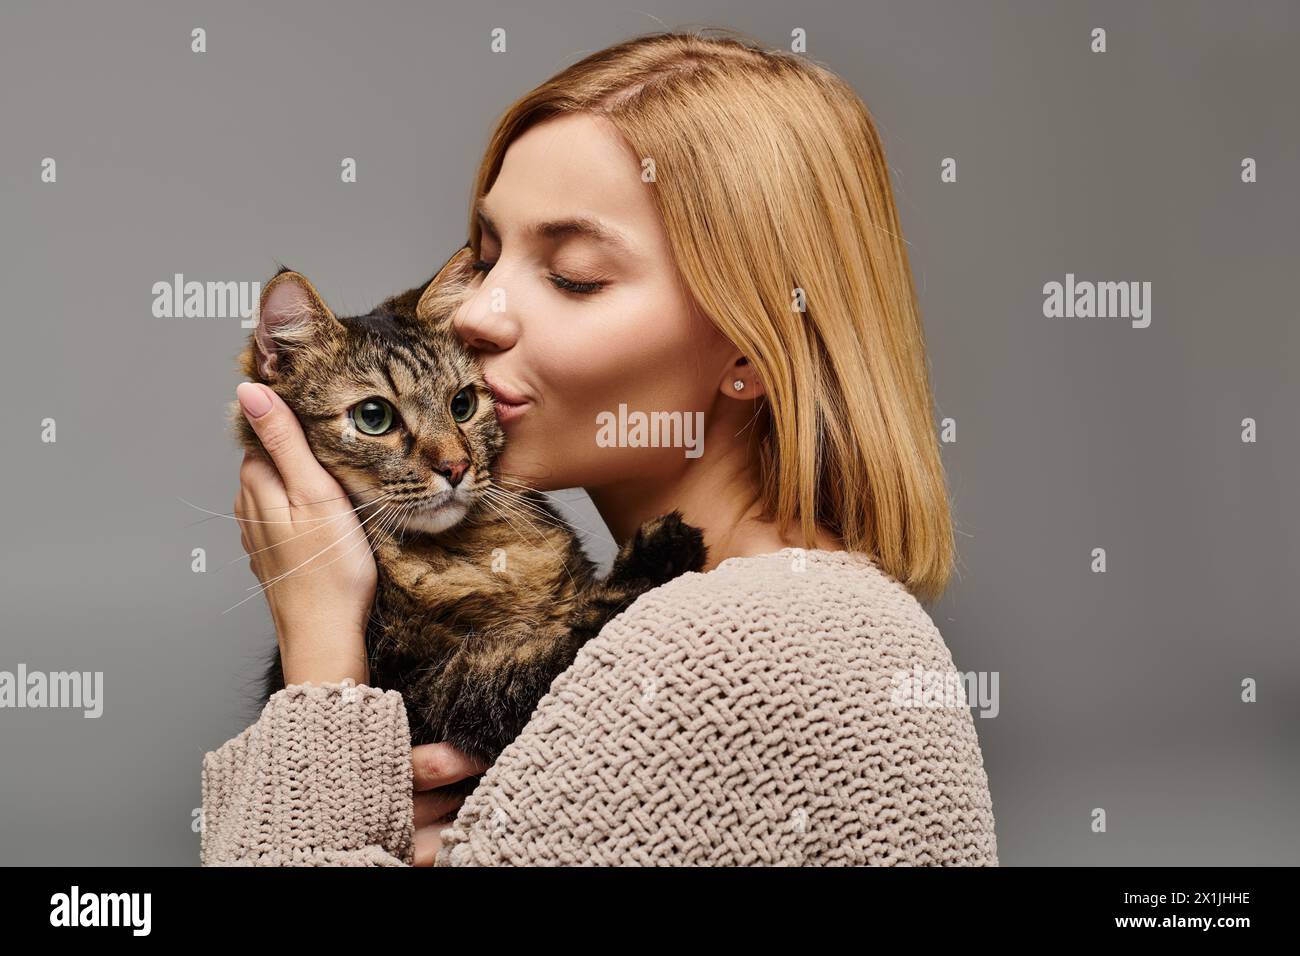 A short-haired woman tenderly cradling a cat in her hands, forming a loving bond between them at home. Stock Photo